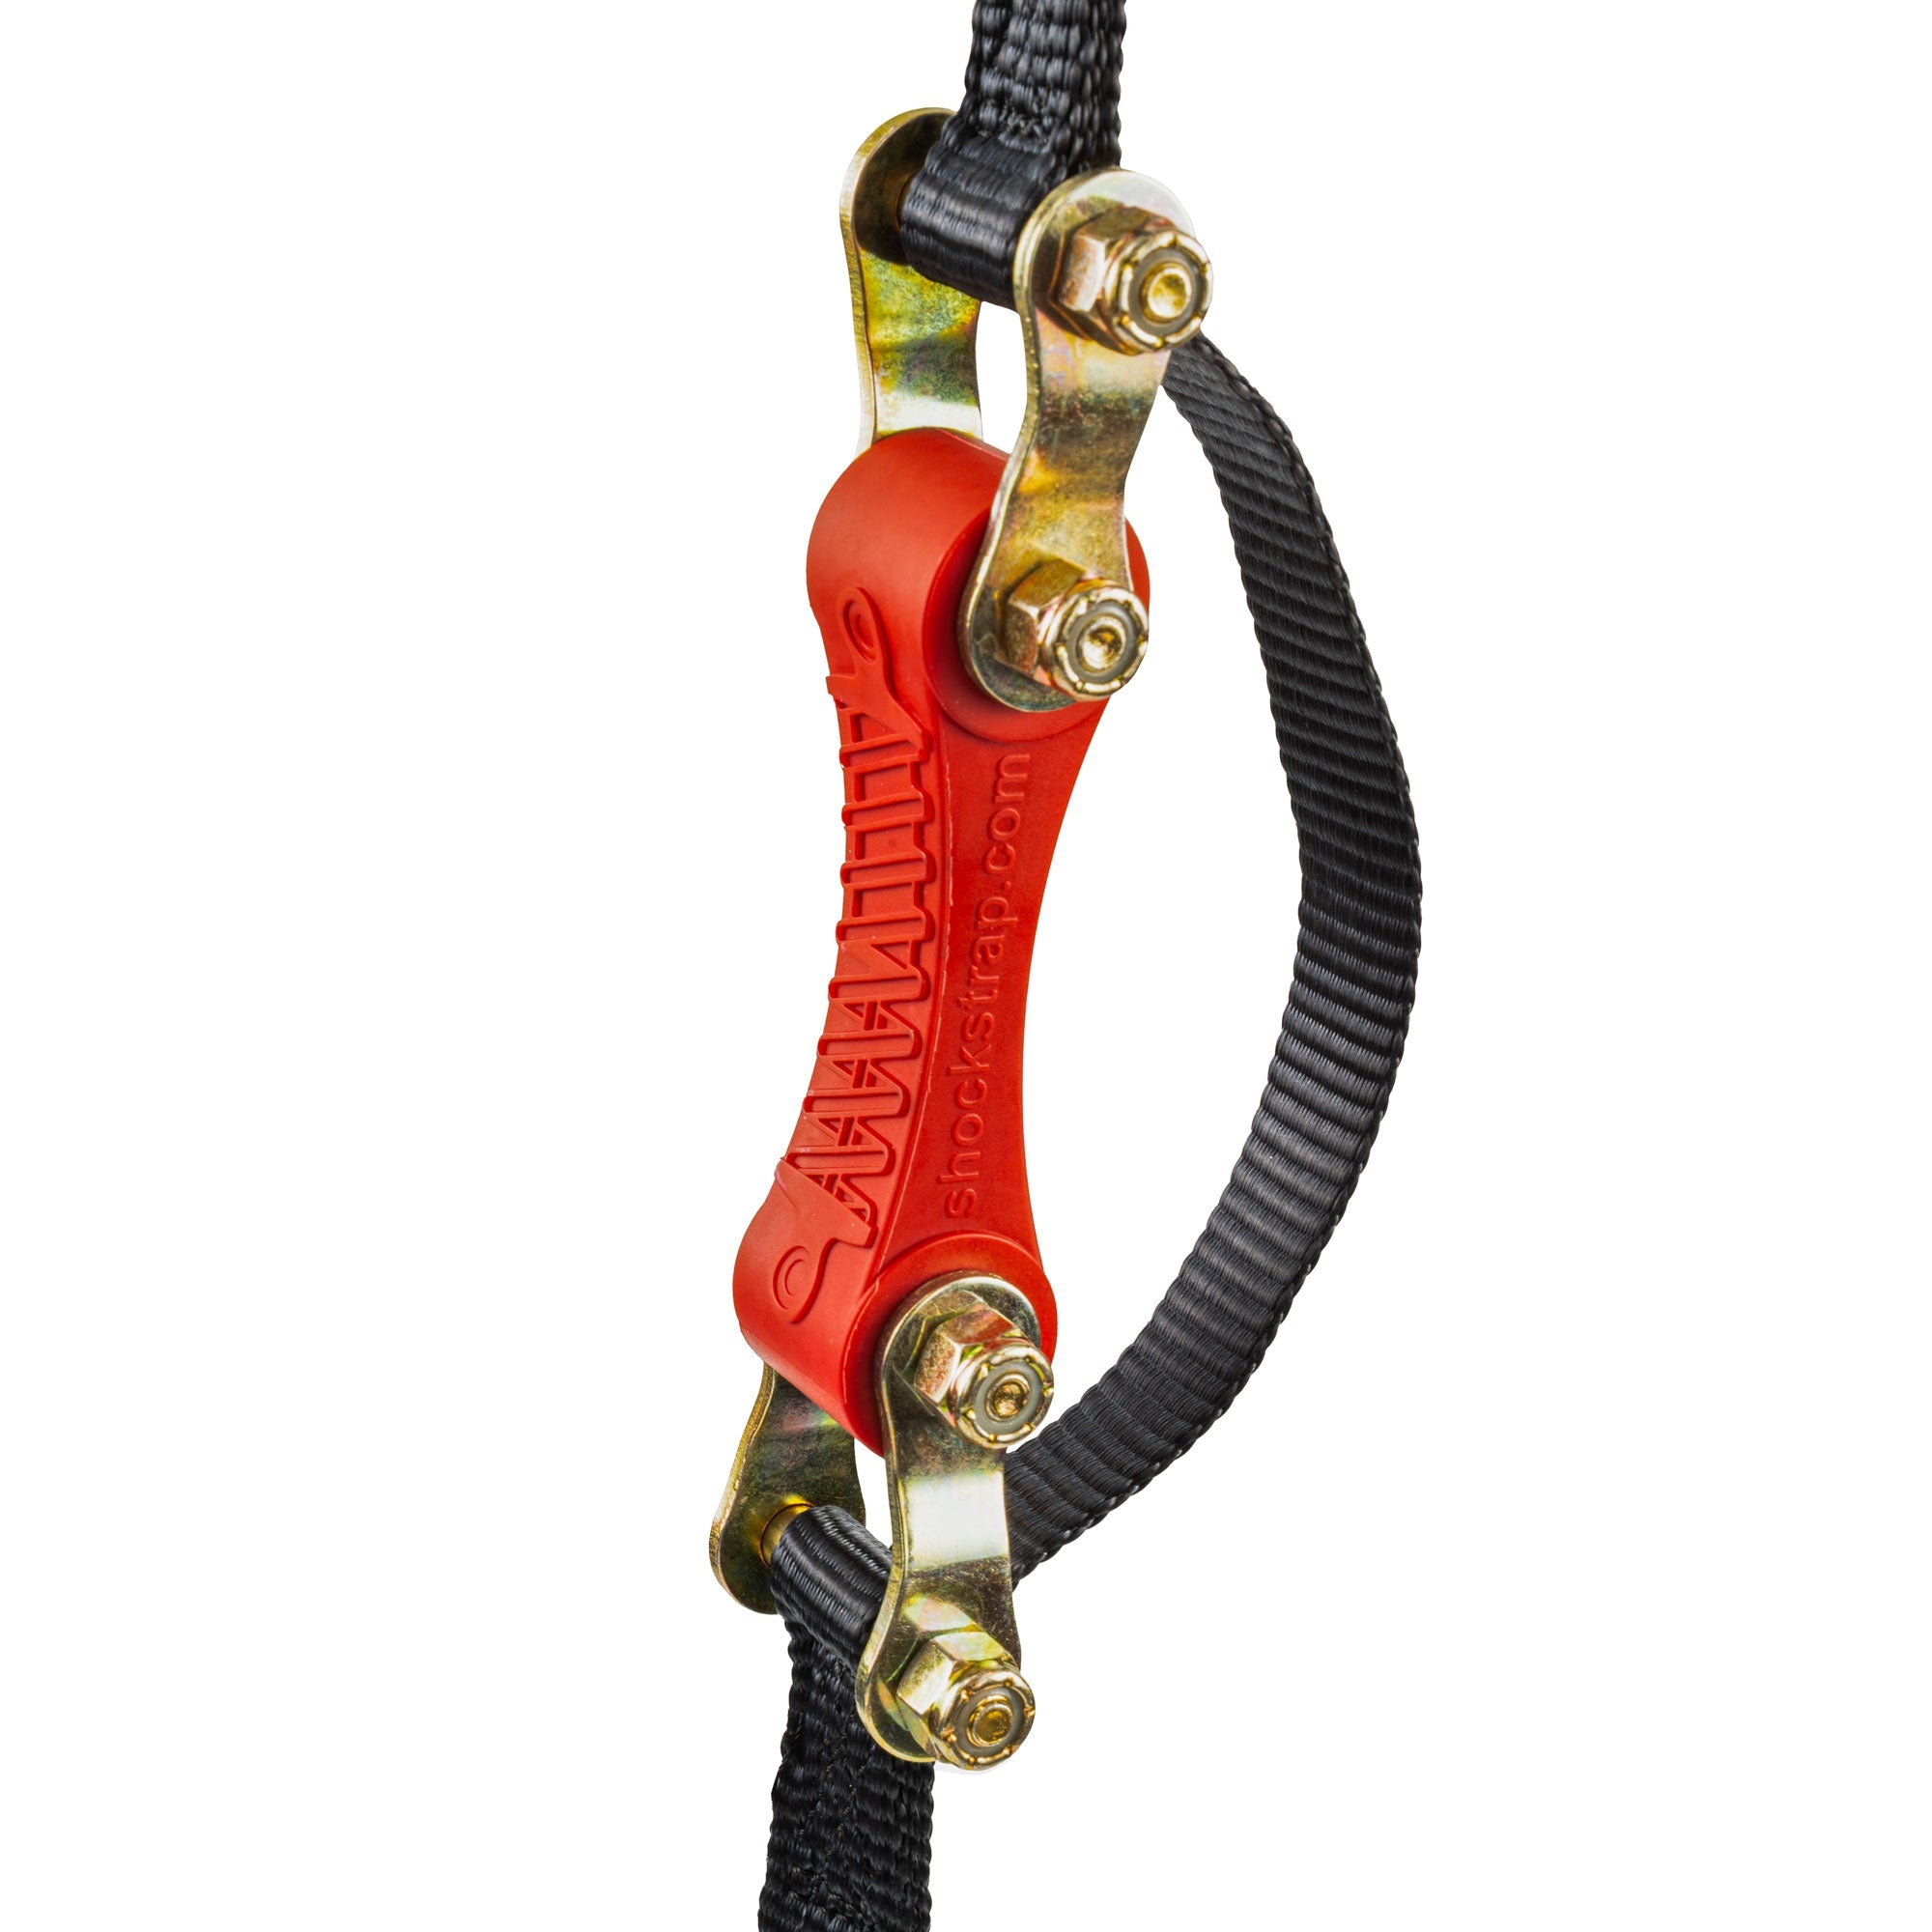 Different types of bungee straps